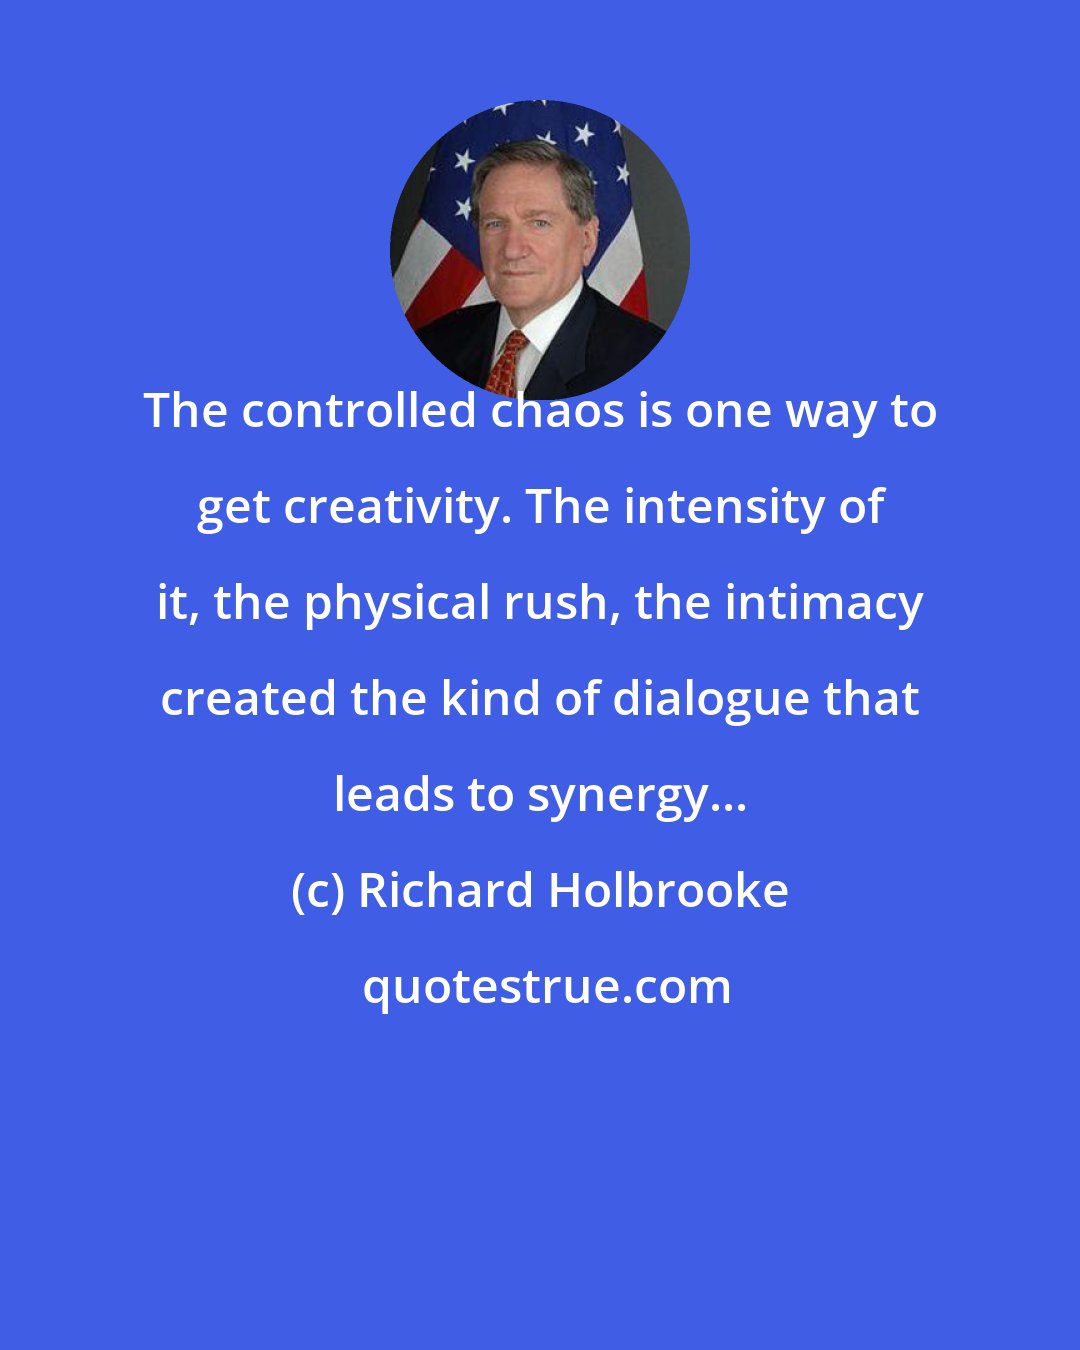 Richard Holbrooke: The controlled chaos is one way to get creativity. The intensity of it, the physical rush, the intimacy created the kind of dialogue that leads to synergy...